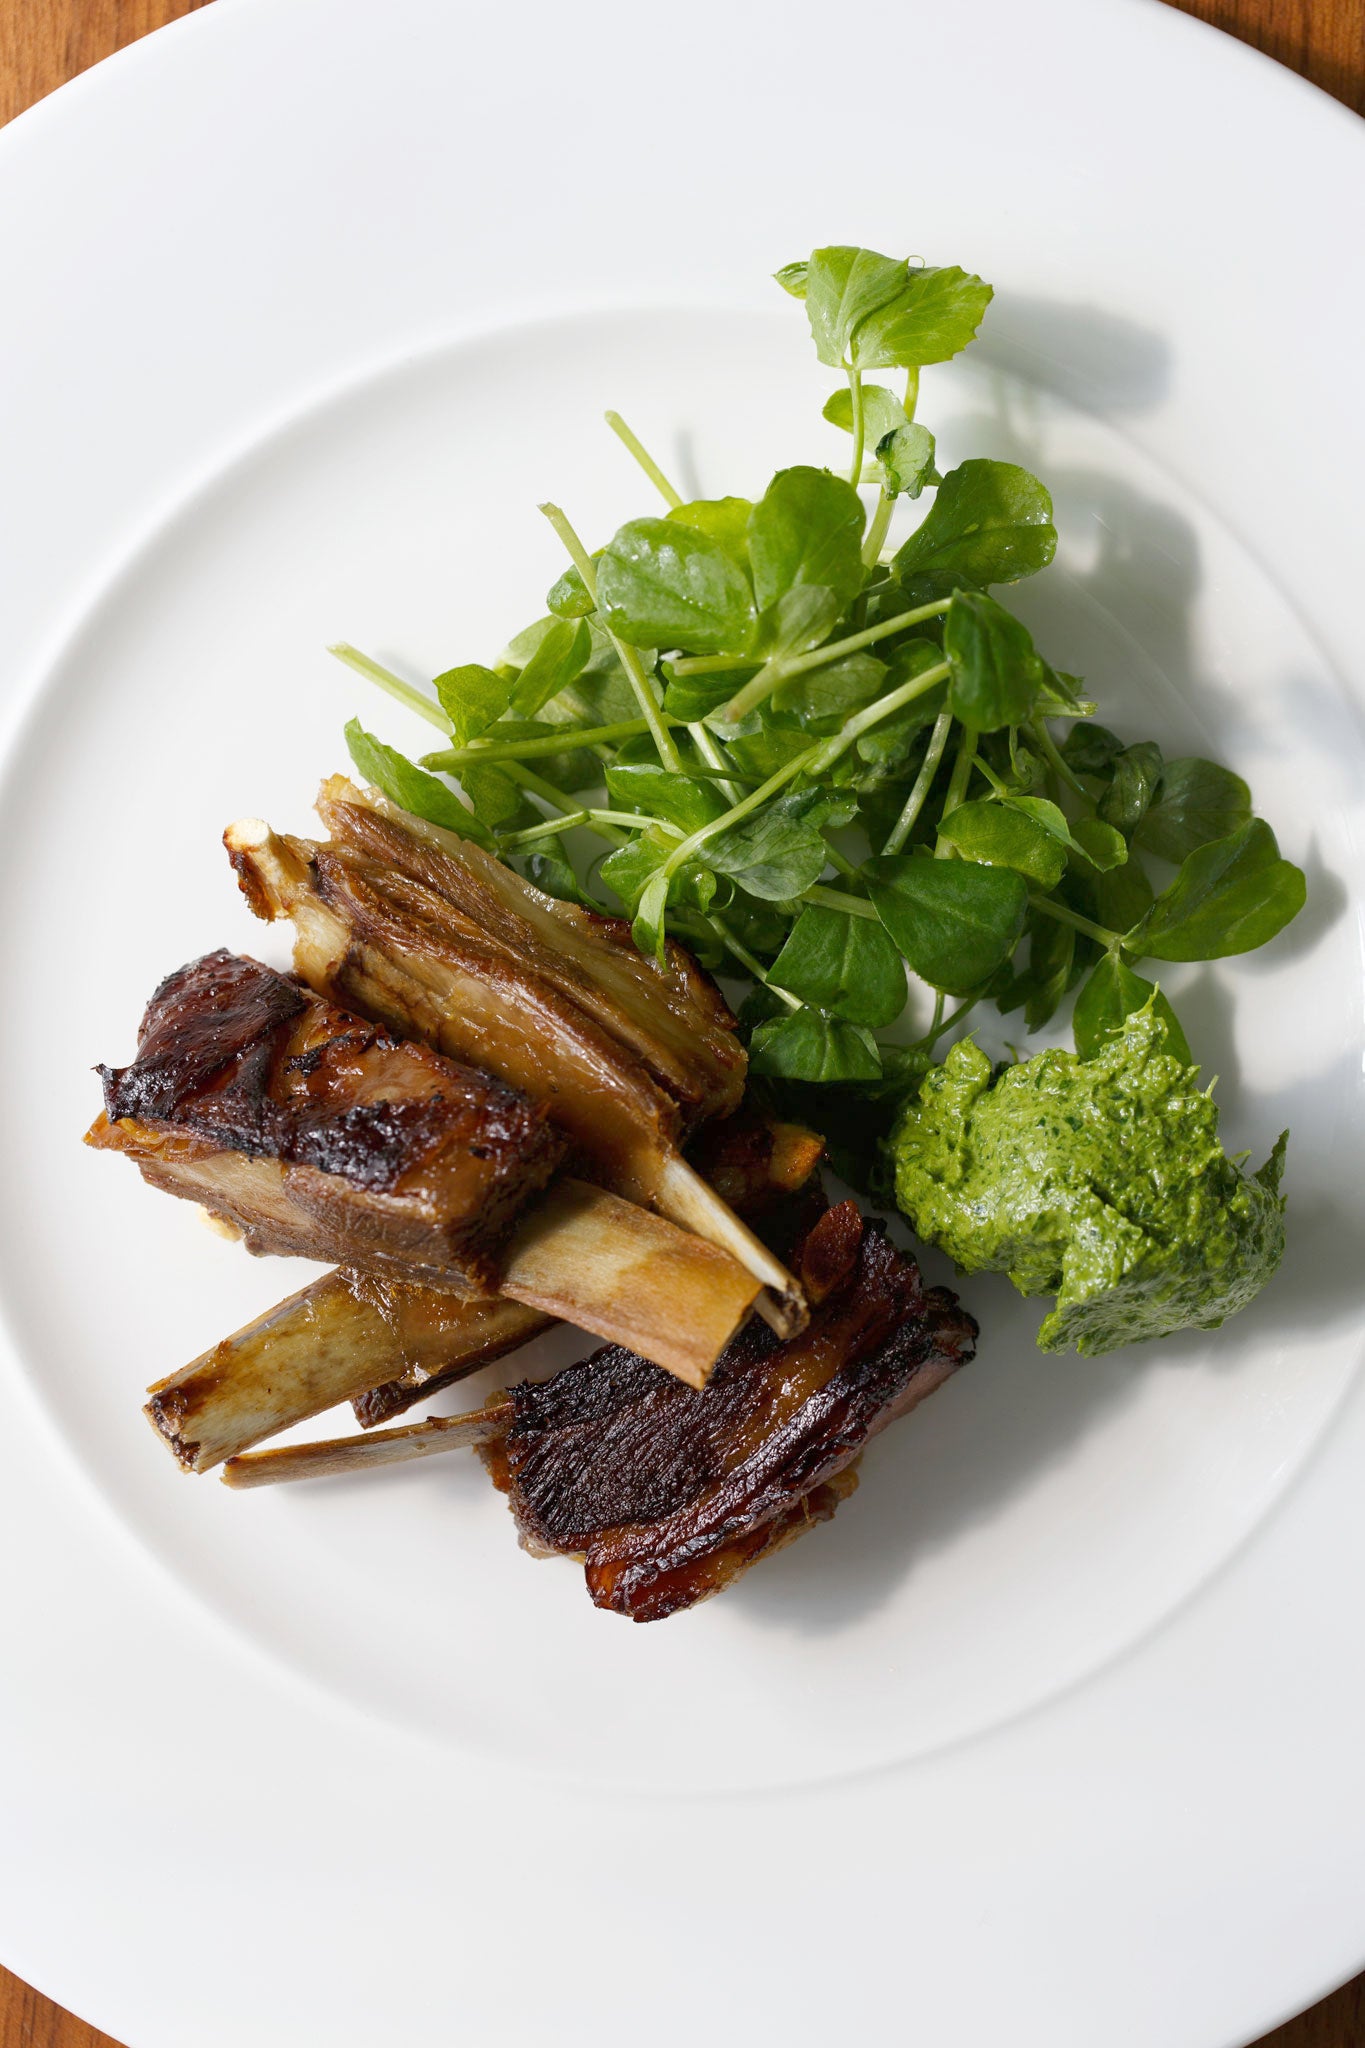 Slow-cooked lamb breast ribs | The Independent